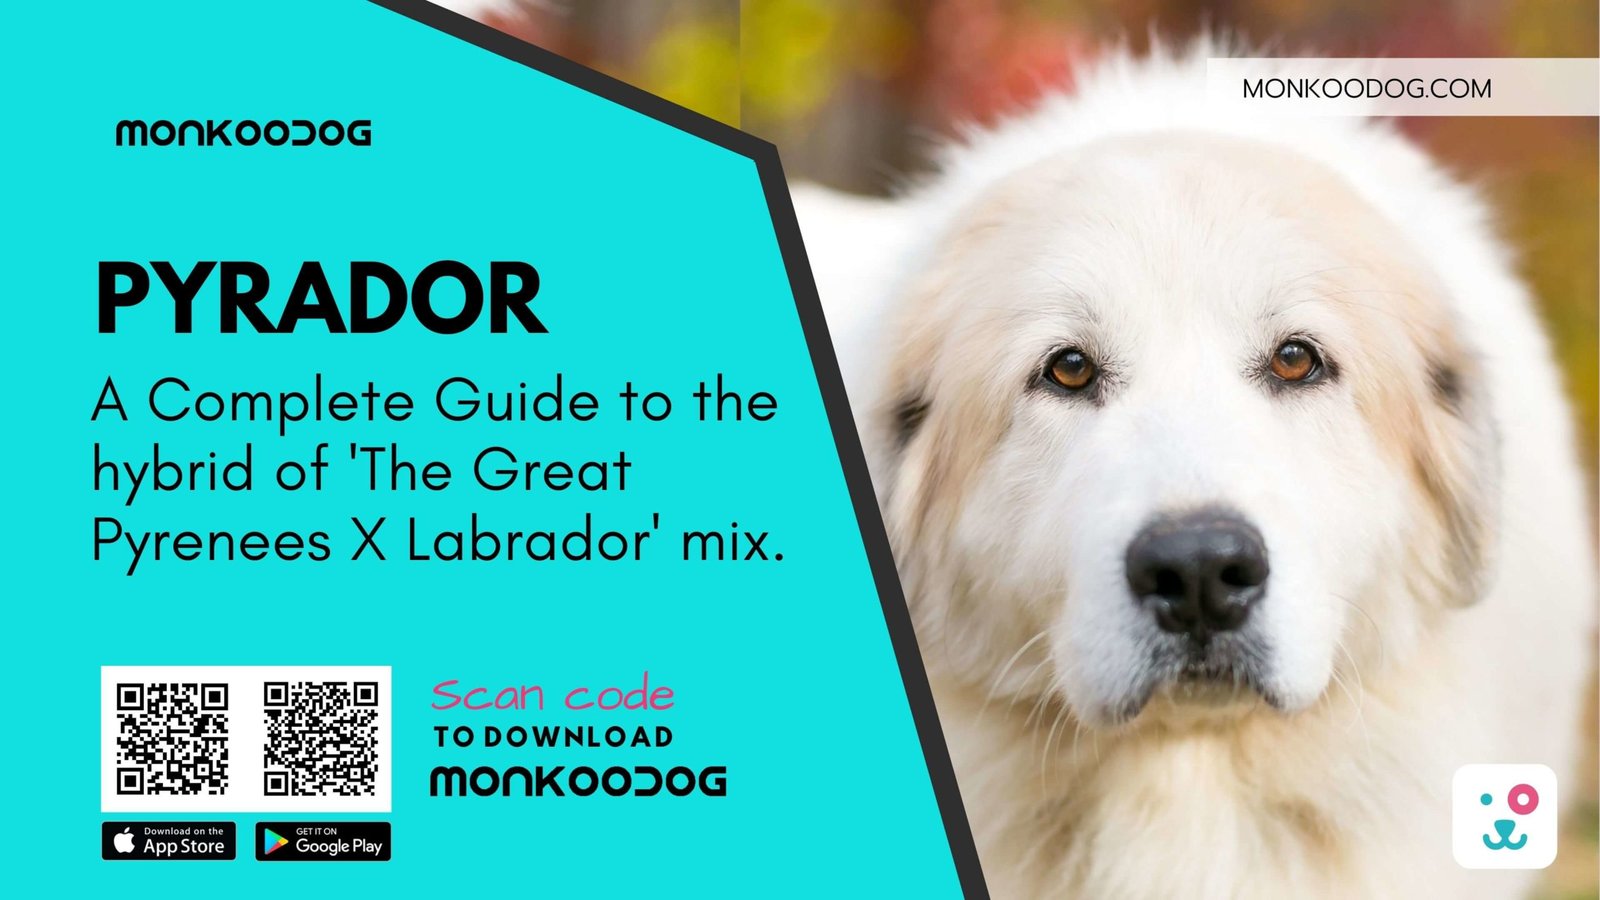 A complete guide to the hybrid Pyrador- The Great Pyrenees Labrador mix